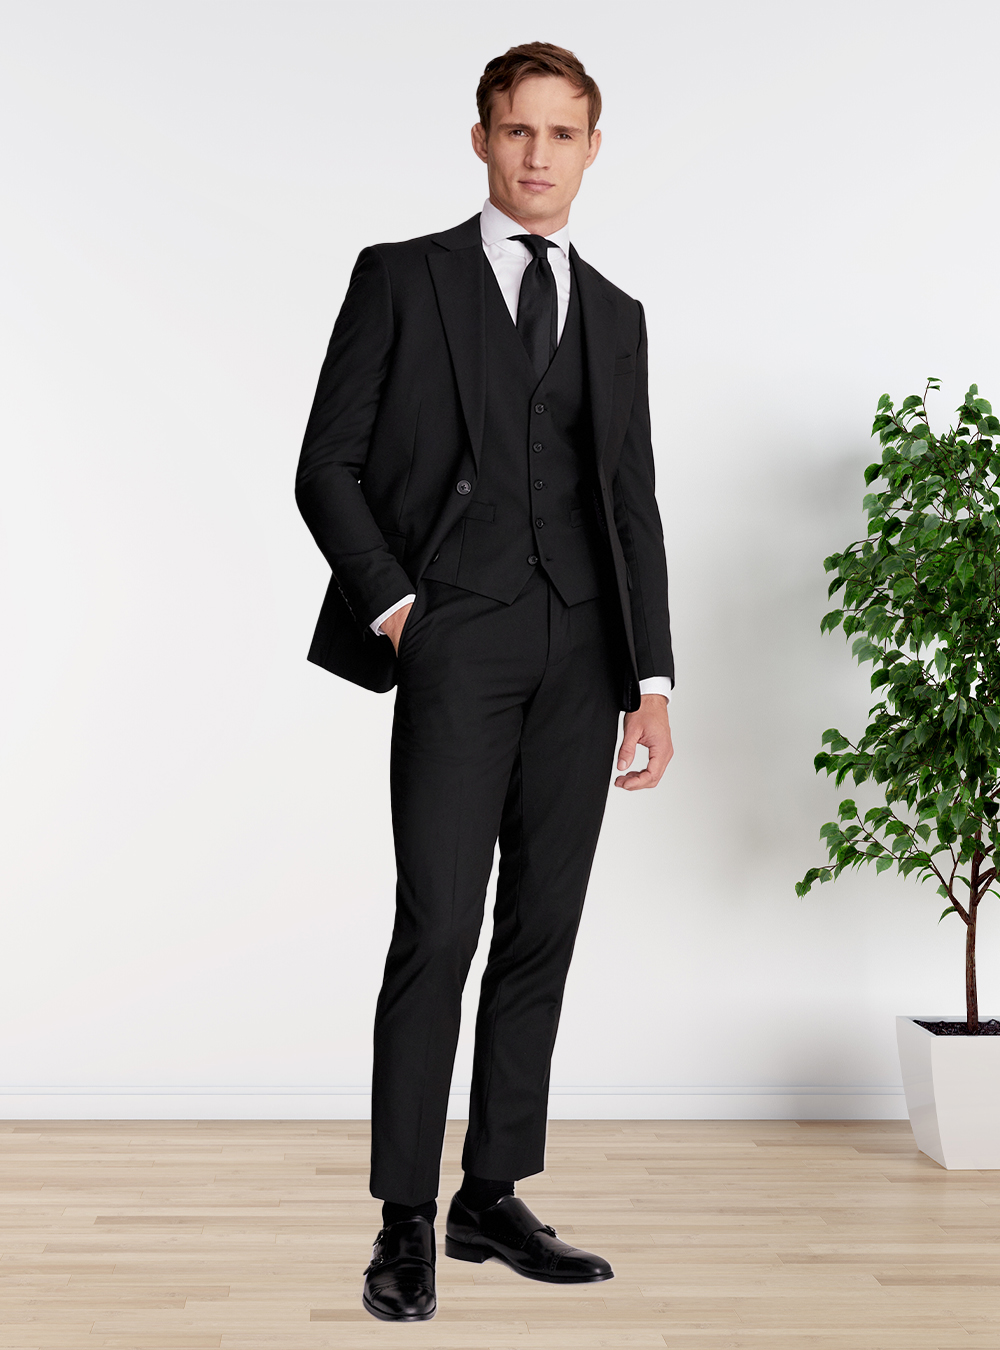 A Complete Guide to Black Suit & Shirt Combinations - The Trend Spotter